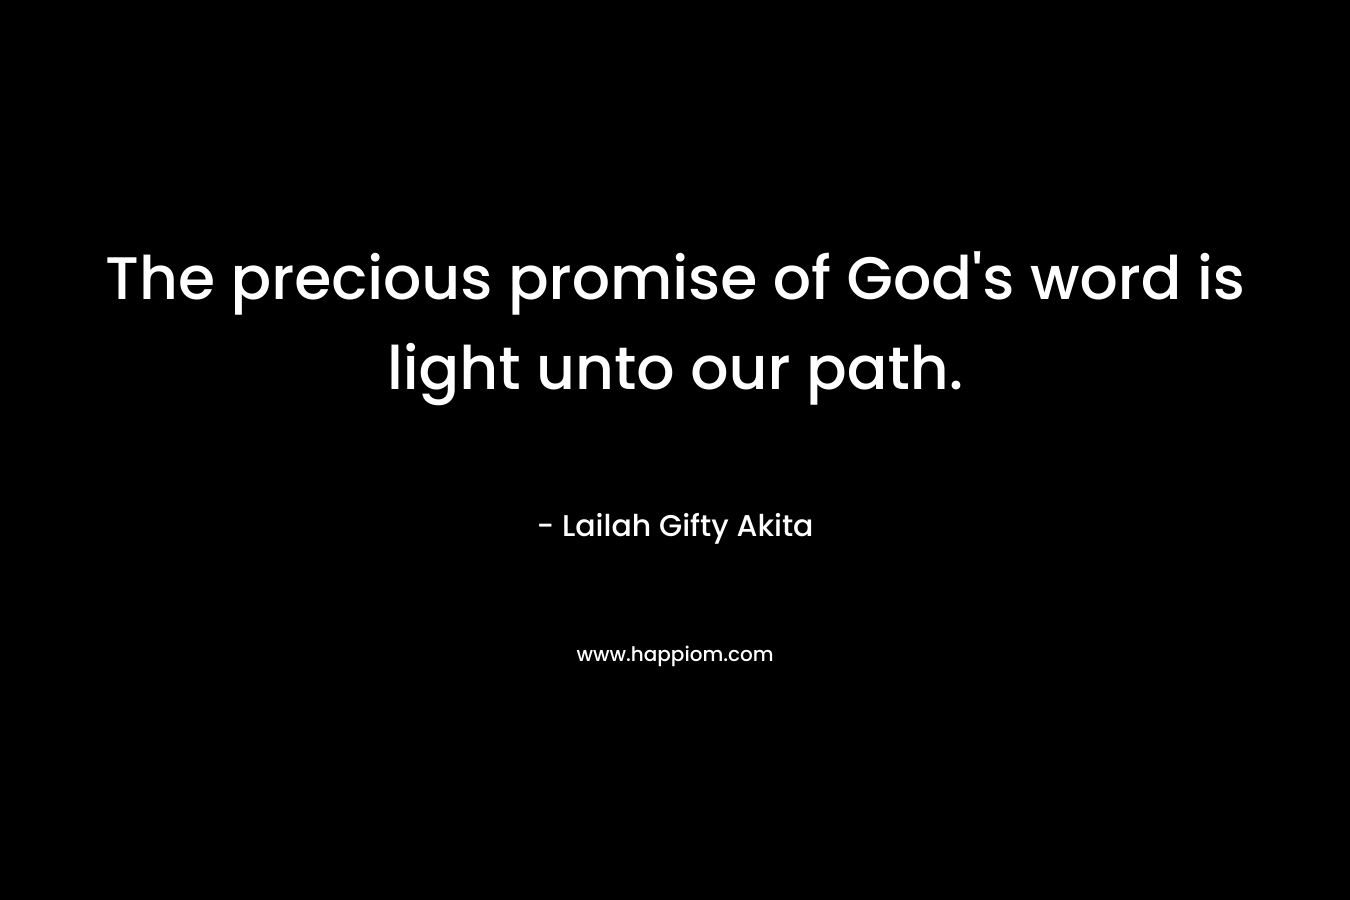 The precious promise of God's word is light unto our path.